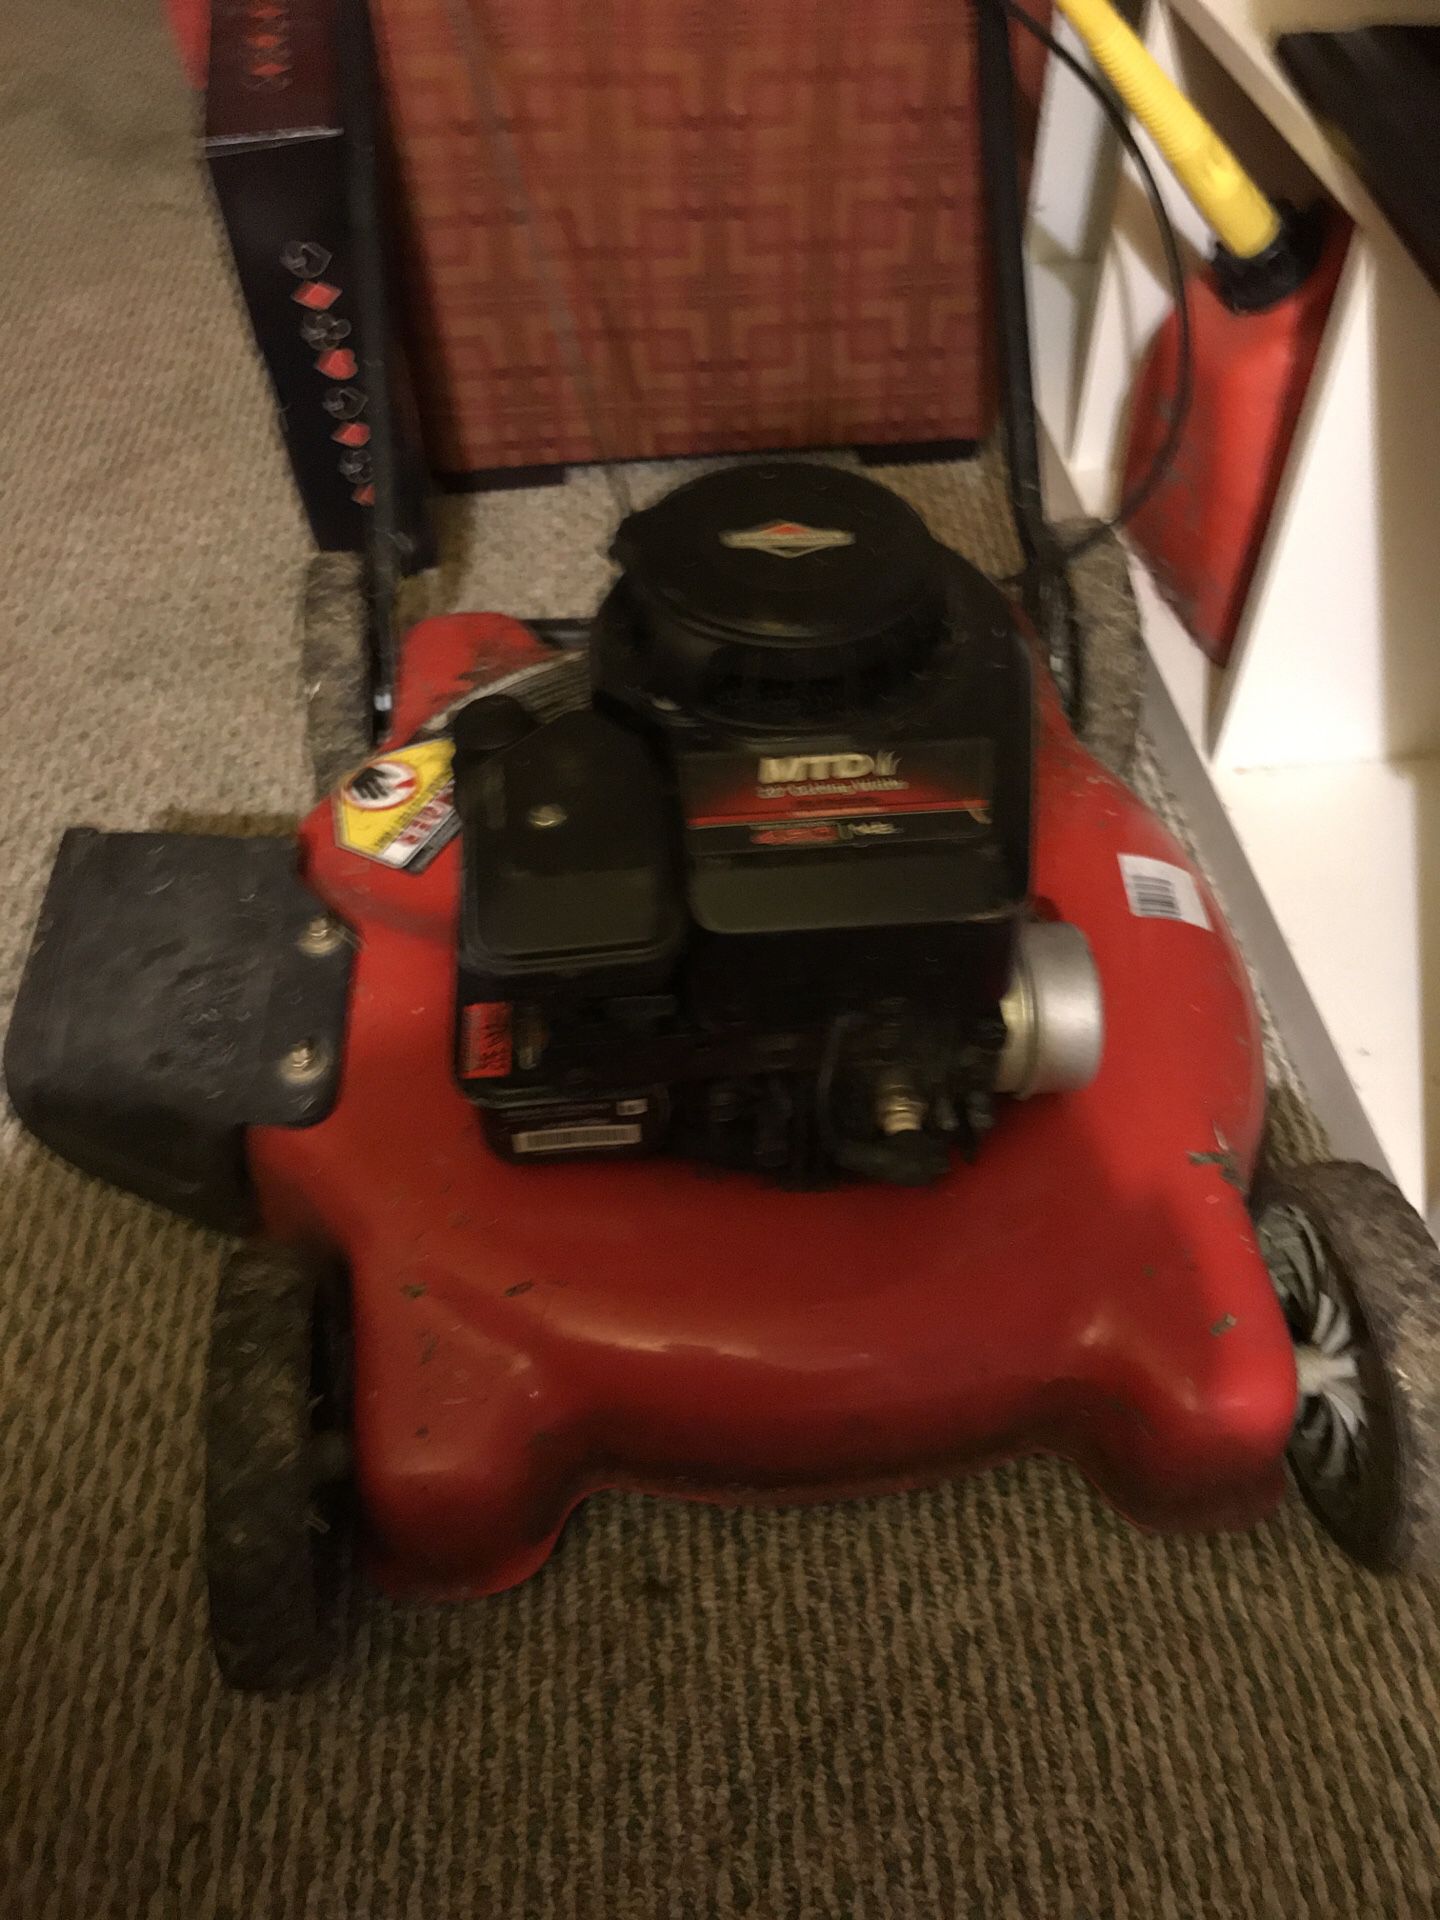 Briggs & Stratton lawn mower. Great condition. Bought it second hand for 70$ looking to sell it for the same. Moving to an apartment. Need to seek it